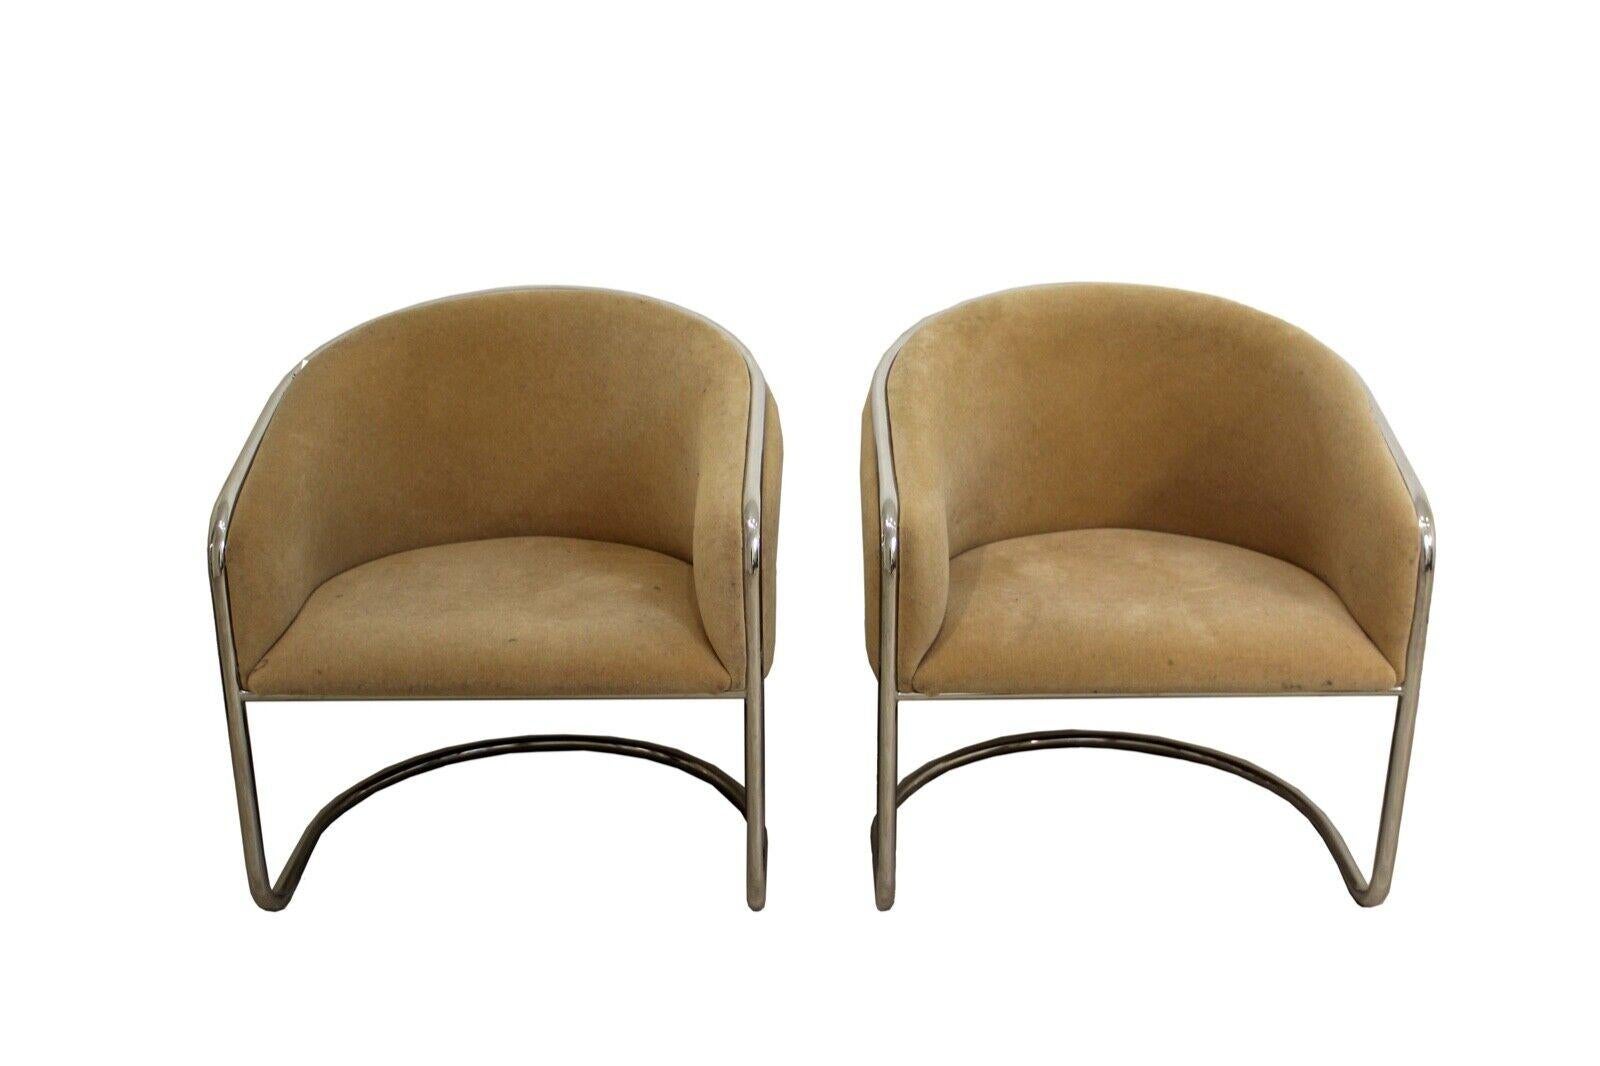 Le Shoppe Too presents a pair of Thonet bucket lounge chairs in Mohair upholstery. Can be used as is or redone in your favorite upholstery. In good vintage condition. Wear appropriate to age and use. Dimensions: 29